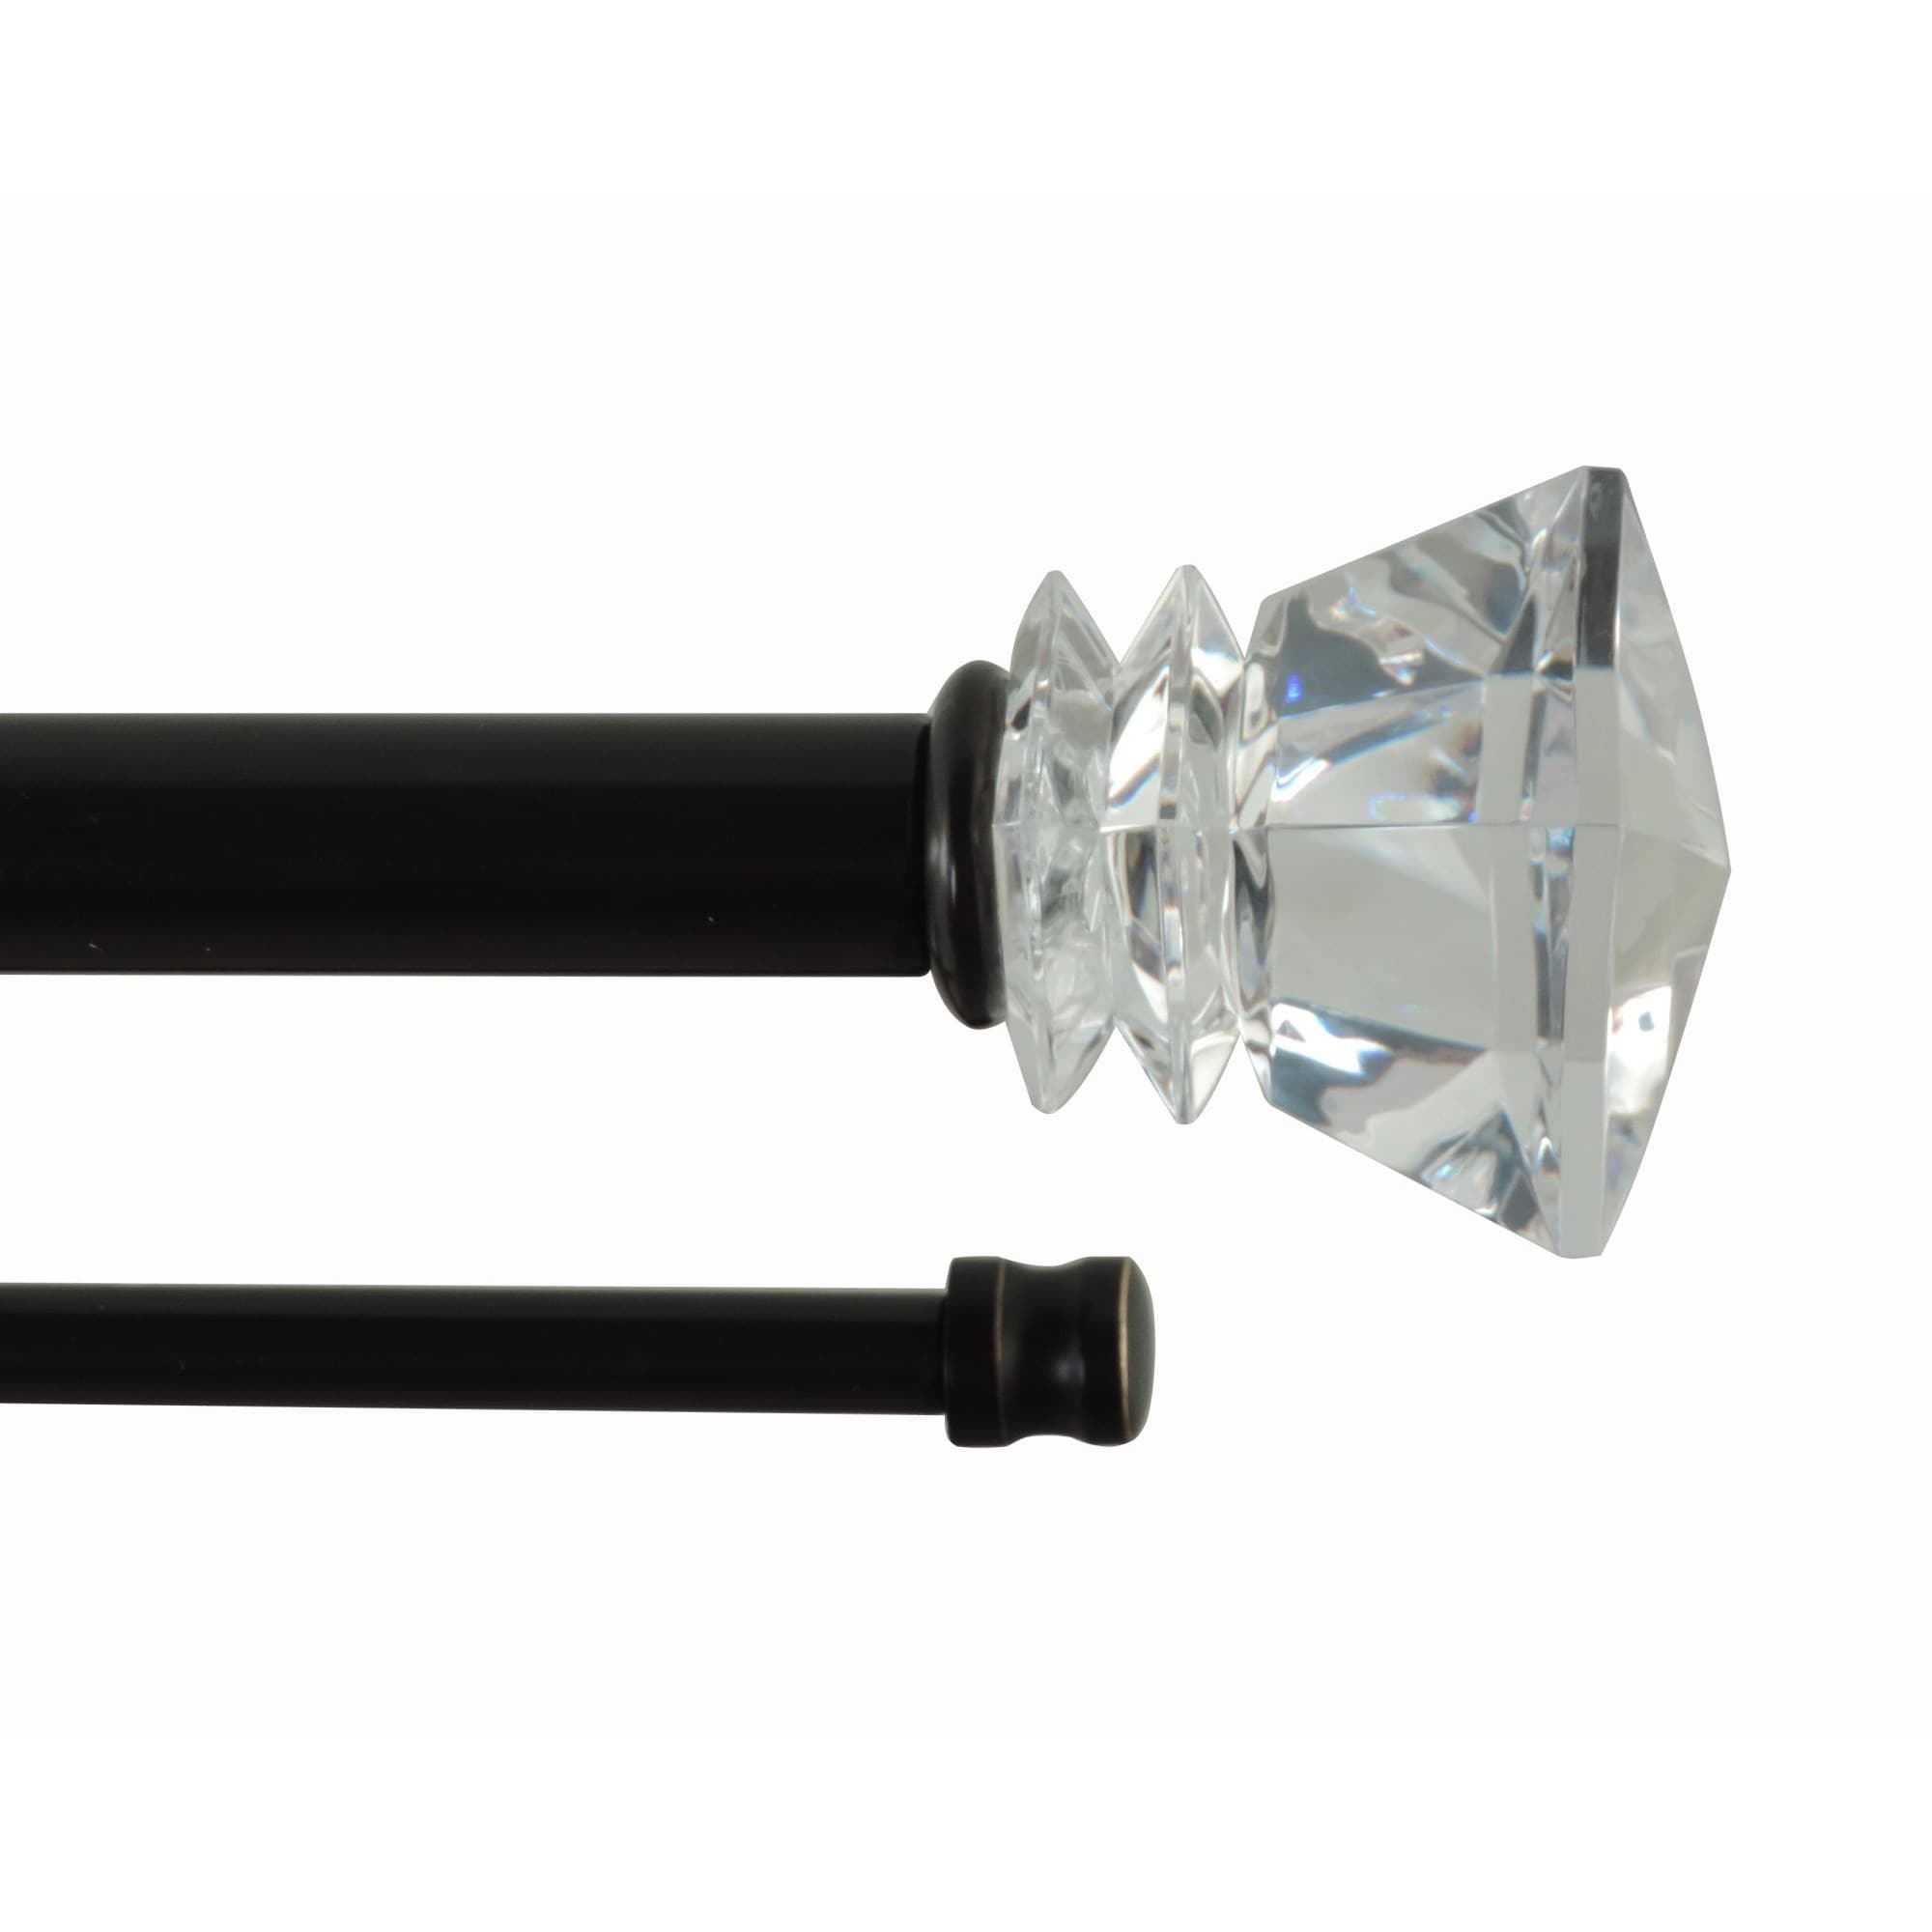 Williamsburge Adjustable Double Curtain Rod With Crystal Look Finials Overstock 16603011